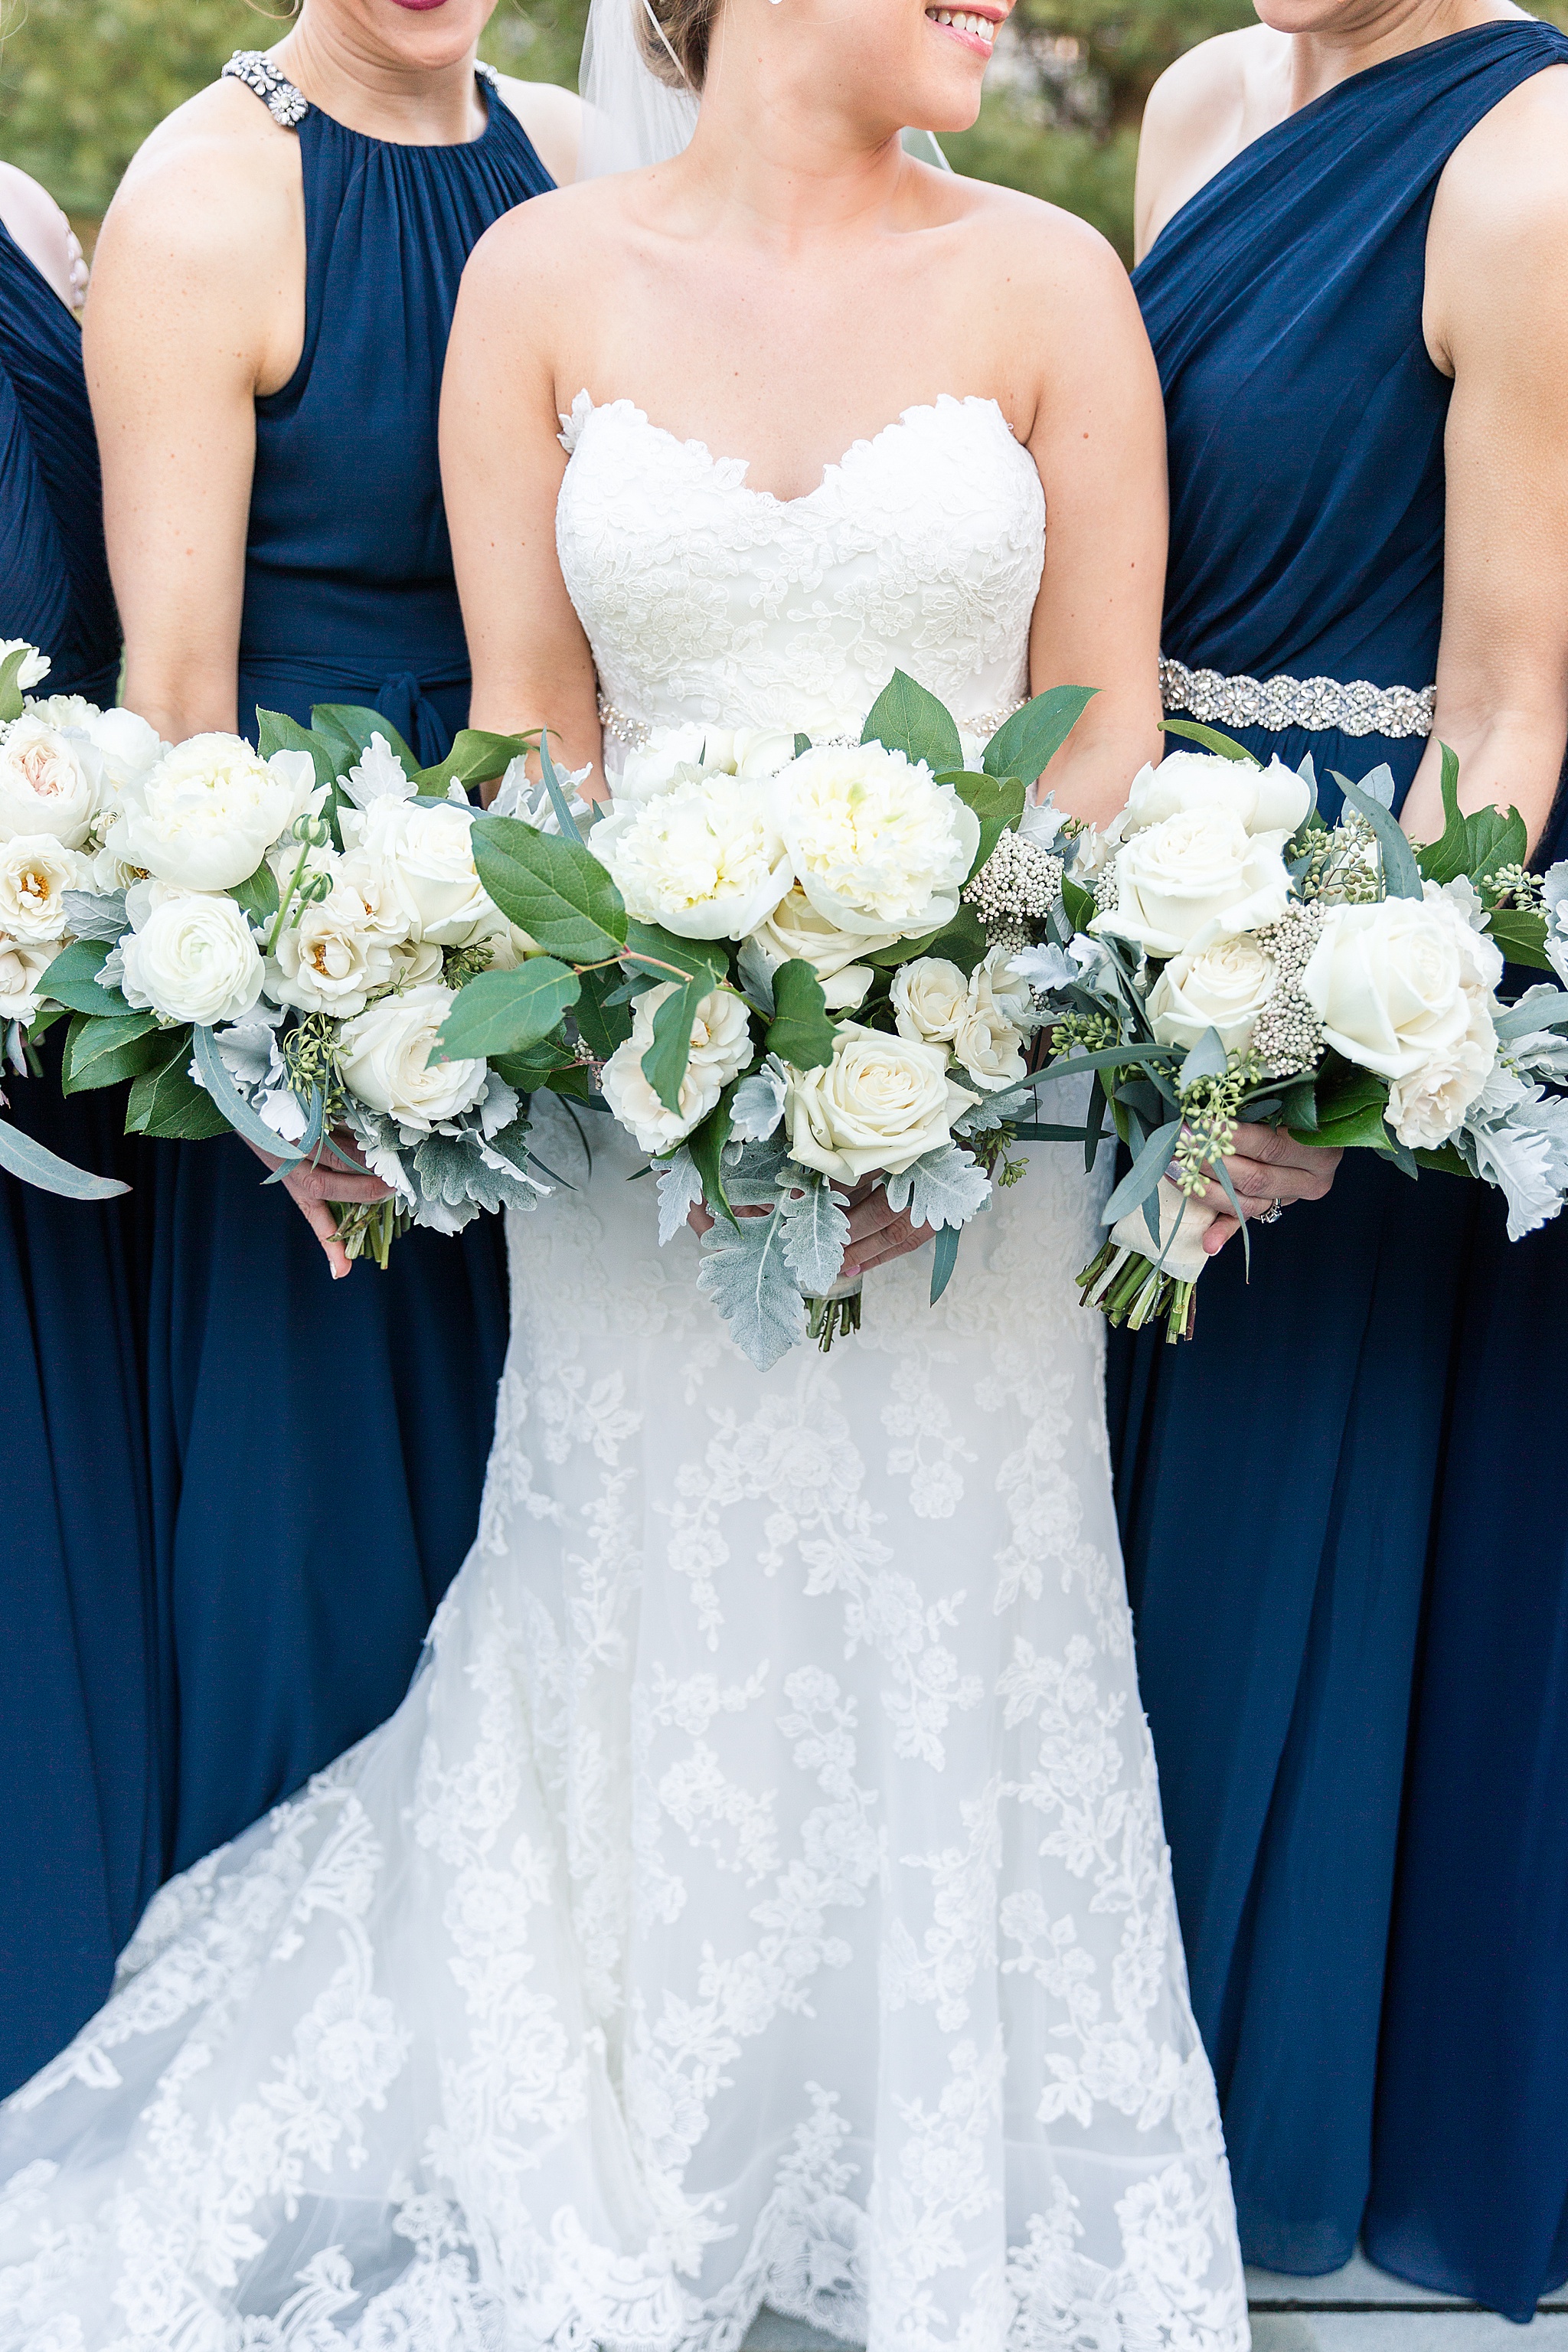 classic wedding day details photographed by Alexandra Mandato Photography